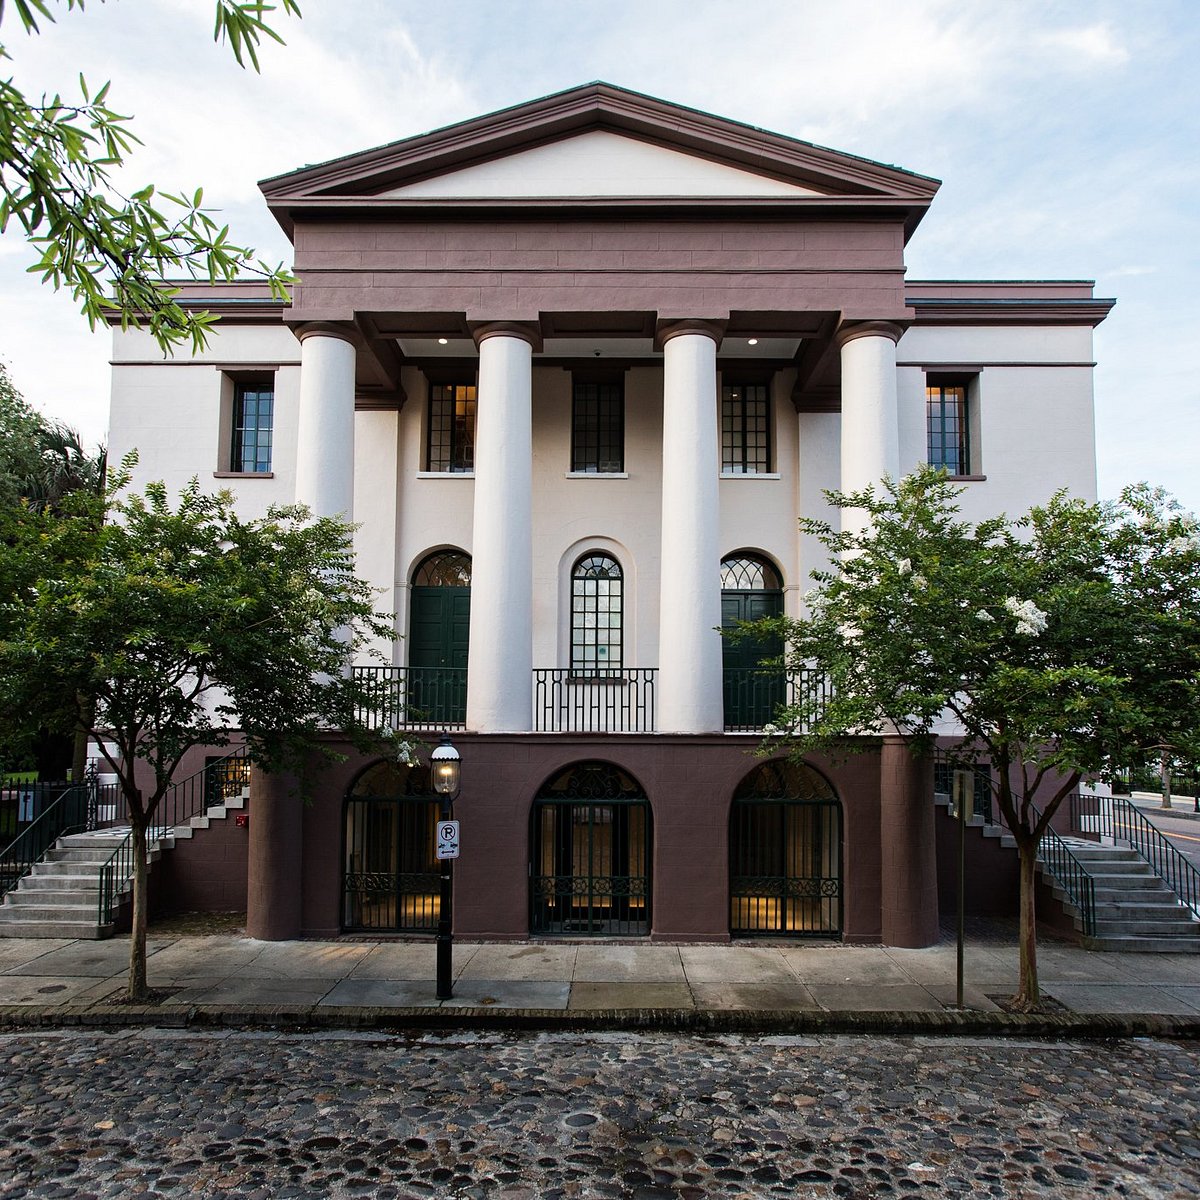 Historical Society Museum